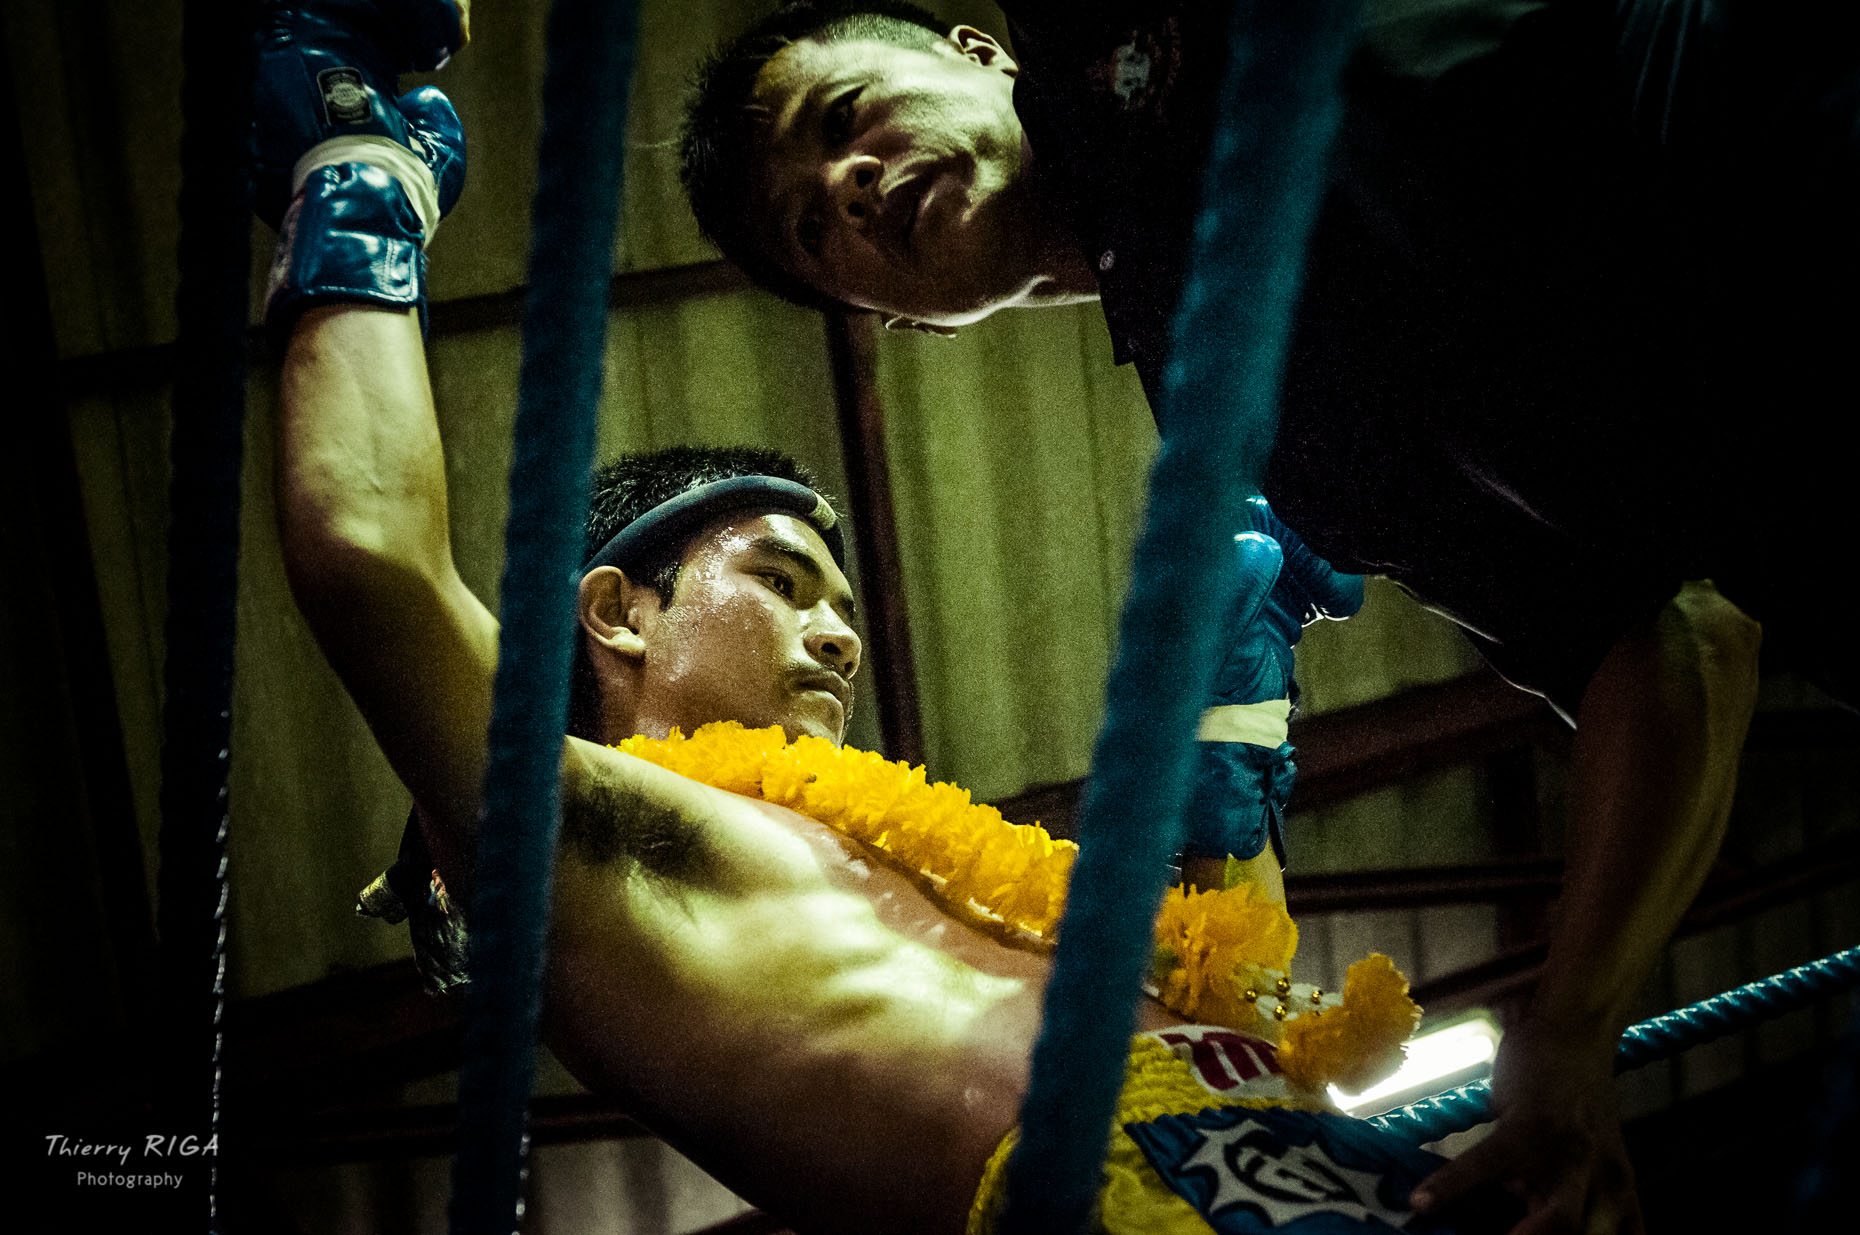 resting during the fight, Muay thai boxing, Thailand, Thierry Riga